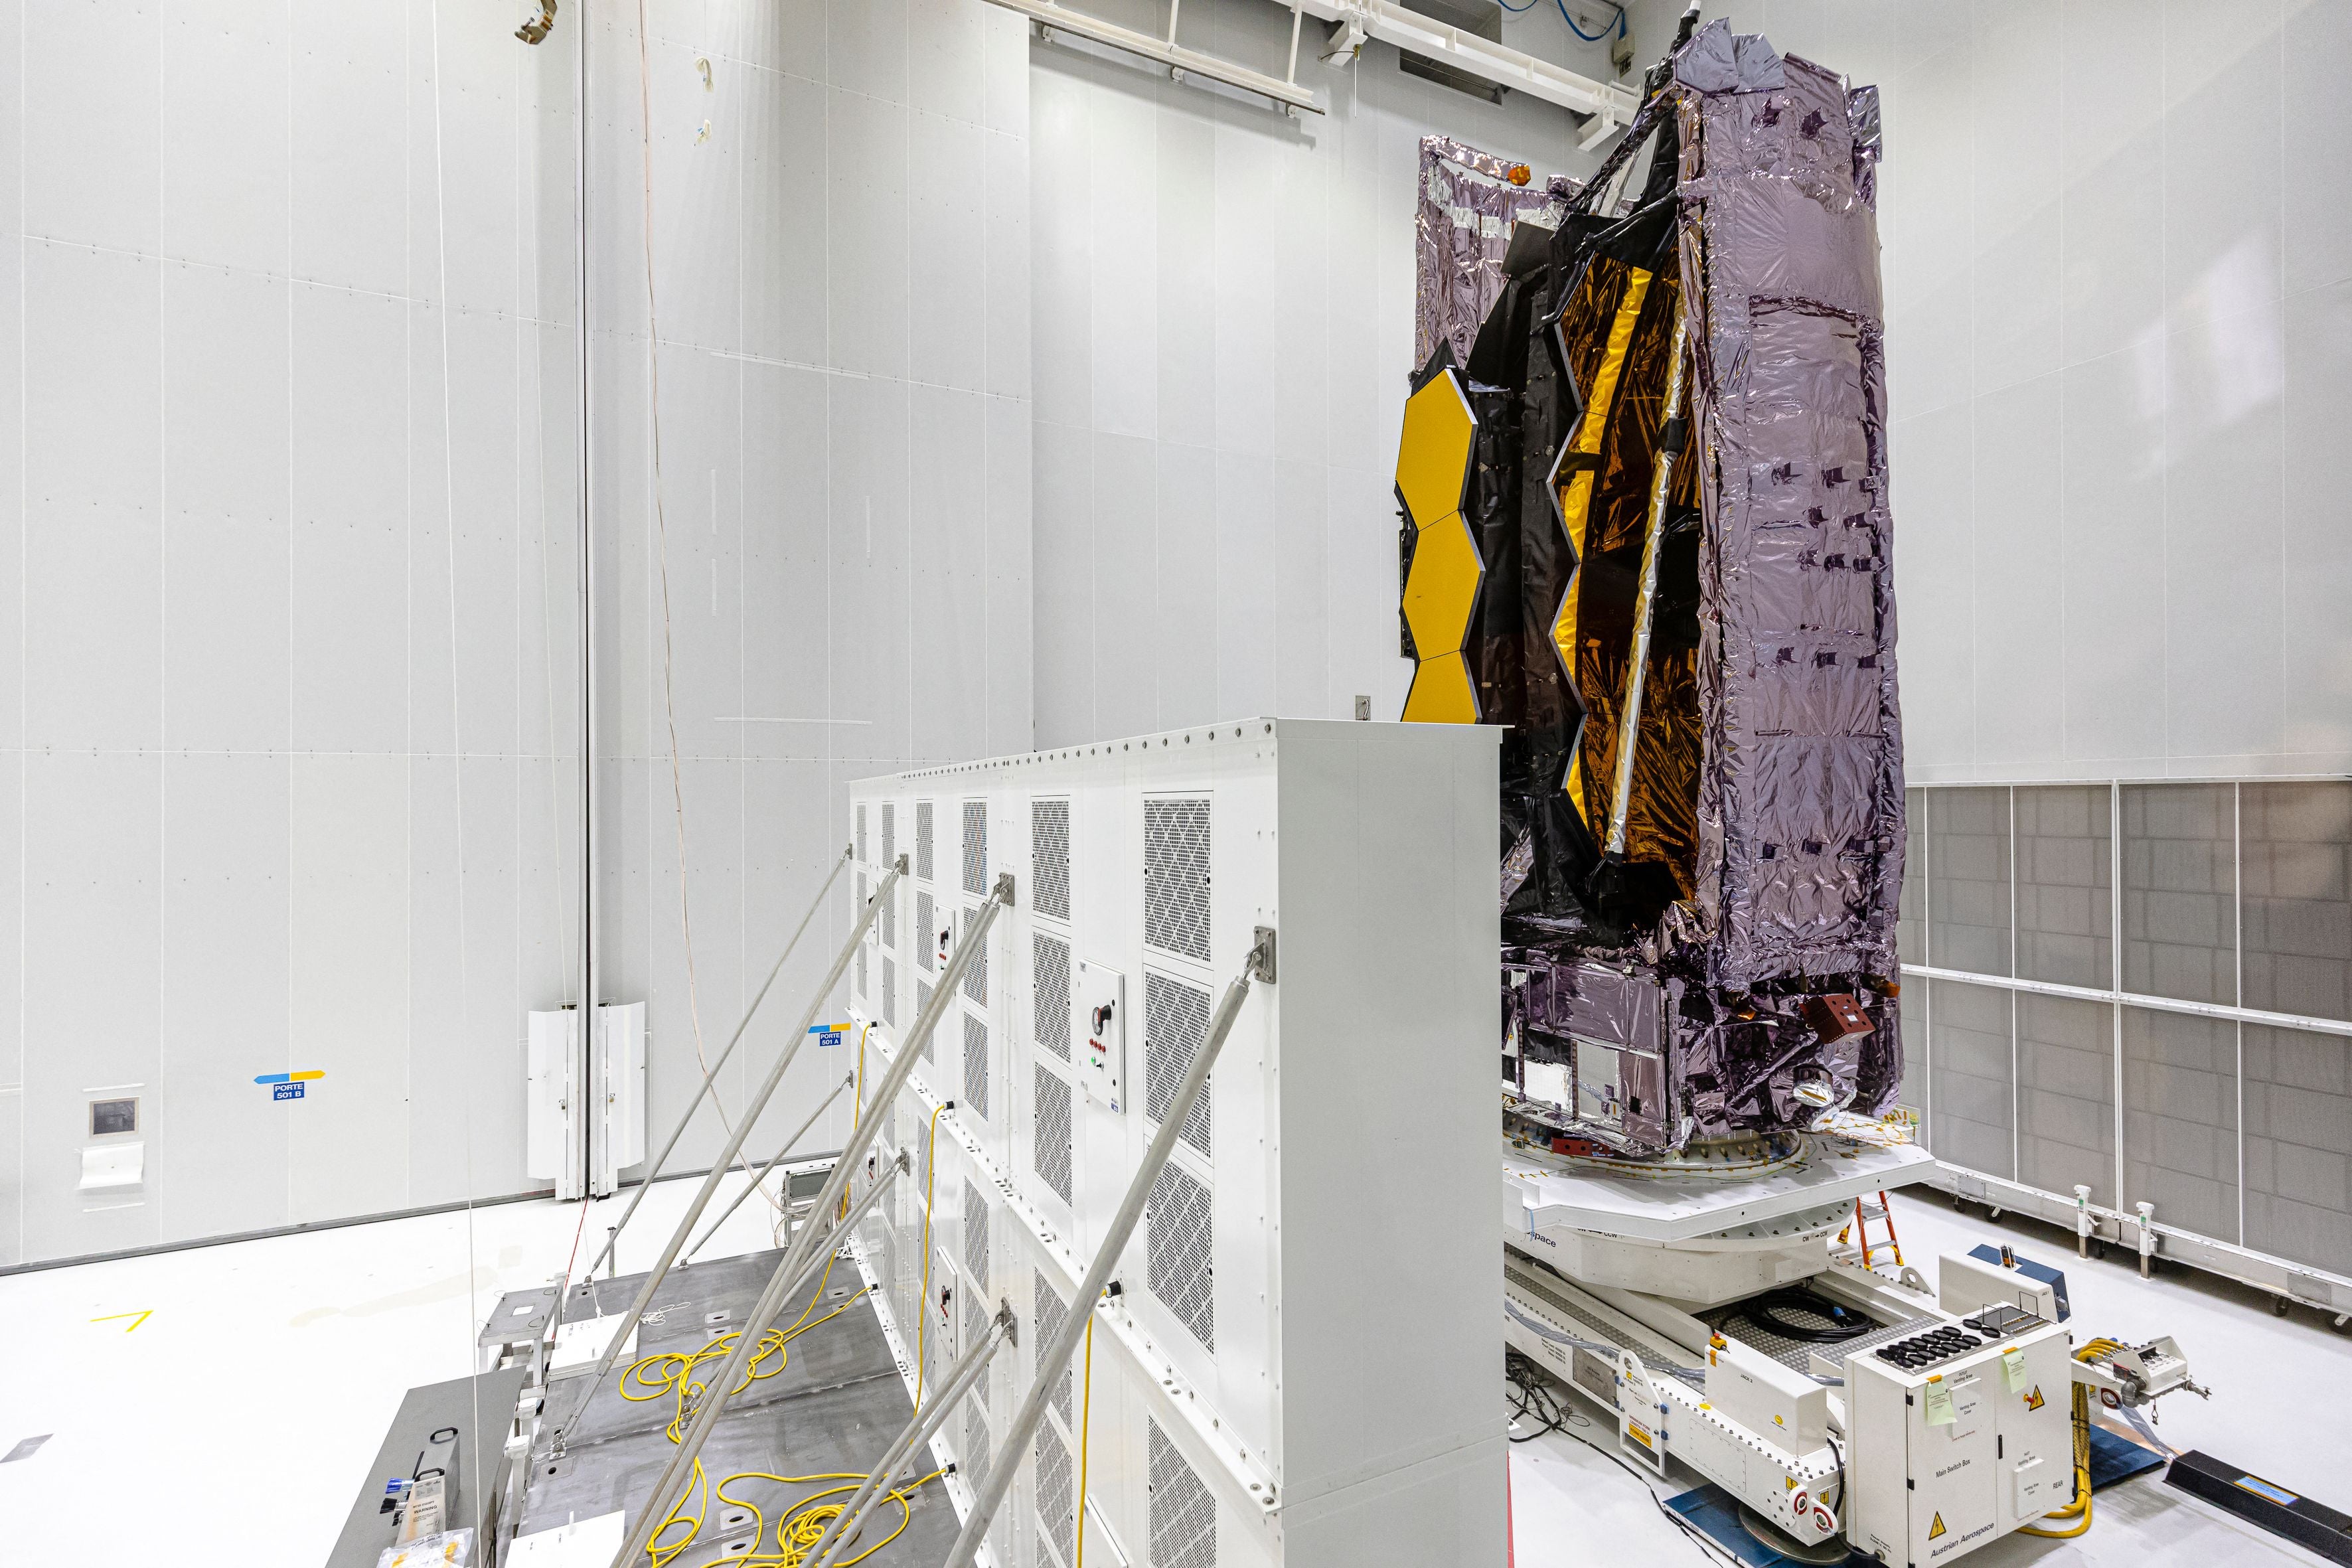 <p>James Webb Space Telescope stands in the S5 Payload Preparation Facility (EPCU-S5) at The Guiana Space Centre, Kourou, French Guiana on November 5, 2021</p>